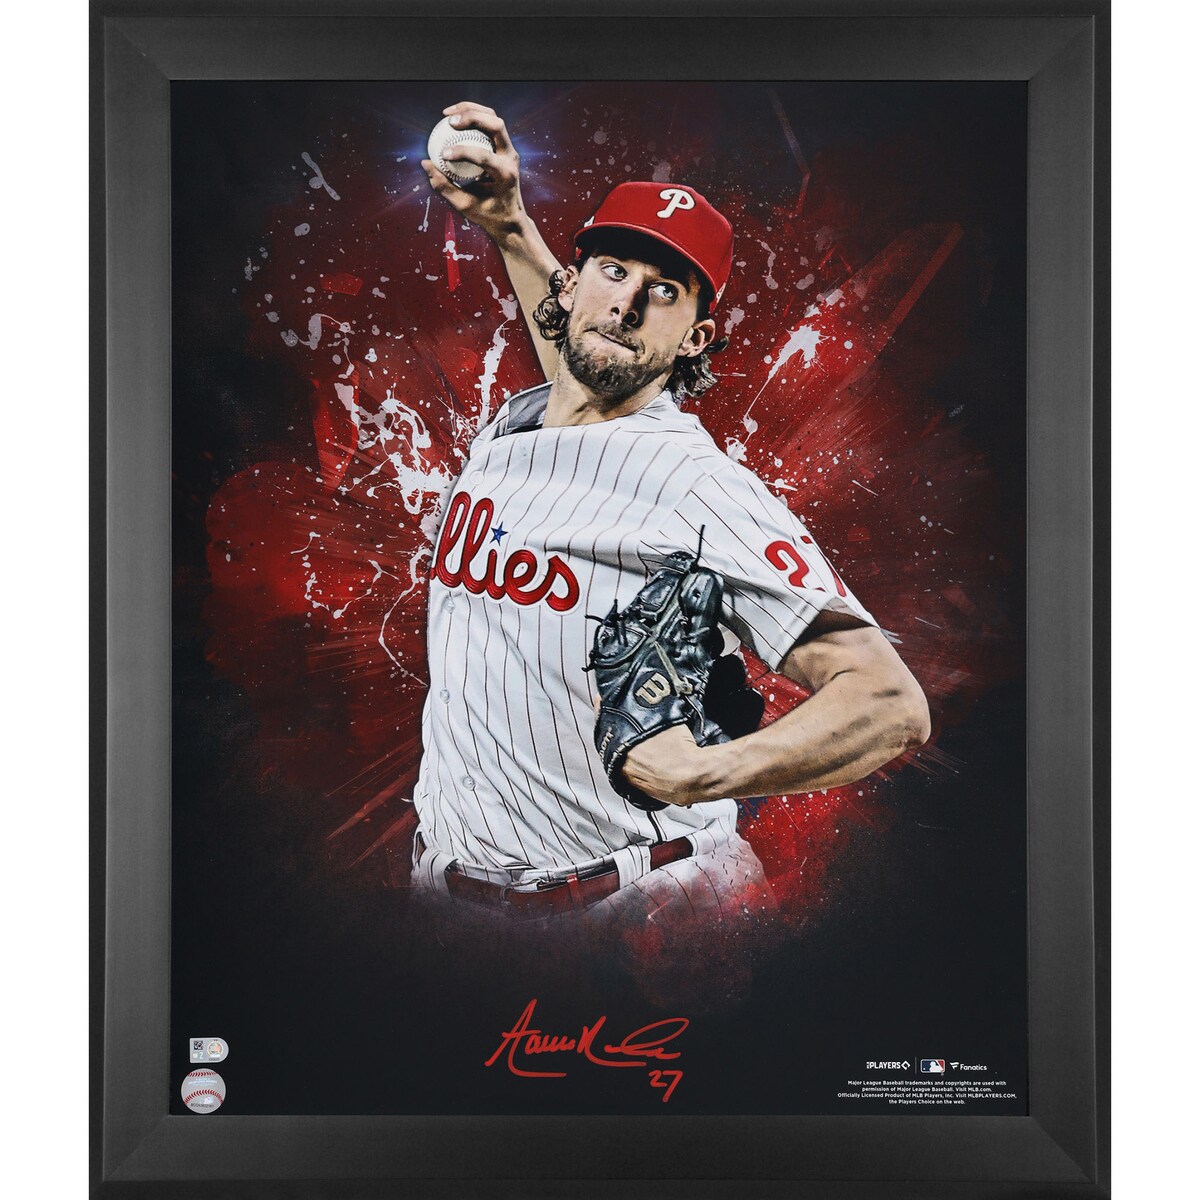 If Aaron Nola is your favorite player on the Philadelphia Phillies, then be sure to pick up this autographed Framed 20" x 24" In Focus Photograph. Featuring a hand-signed signature from the star player, it's the perfect option to display in your home or office.Officially licensedDimensions are approximately 20" x 24"Signature may varyObtained under the auspices of the Major League Baseball Authentication Program and can be verified by its numbered hologram at MLB.comMade in the USABrand: Fanatics AuthenticFrame measures approx. 23.5'' x 27.5'' x 1''